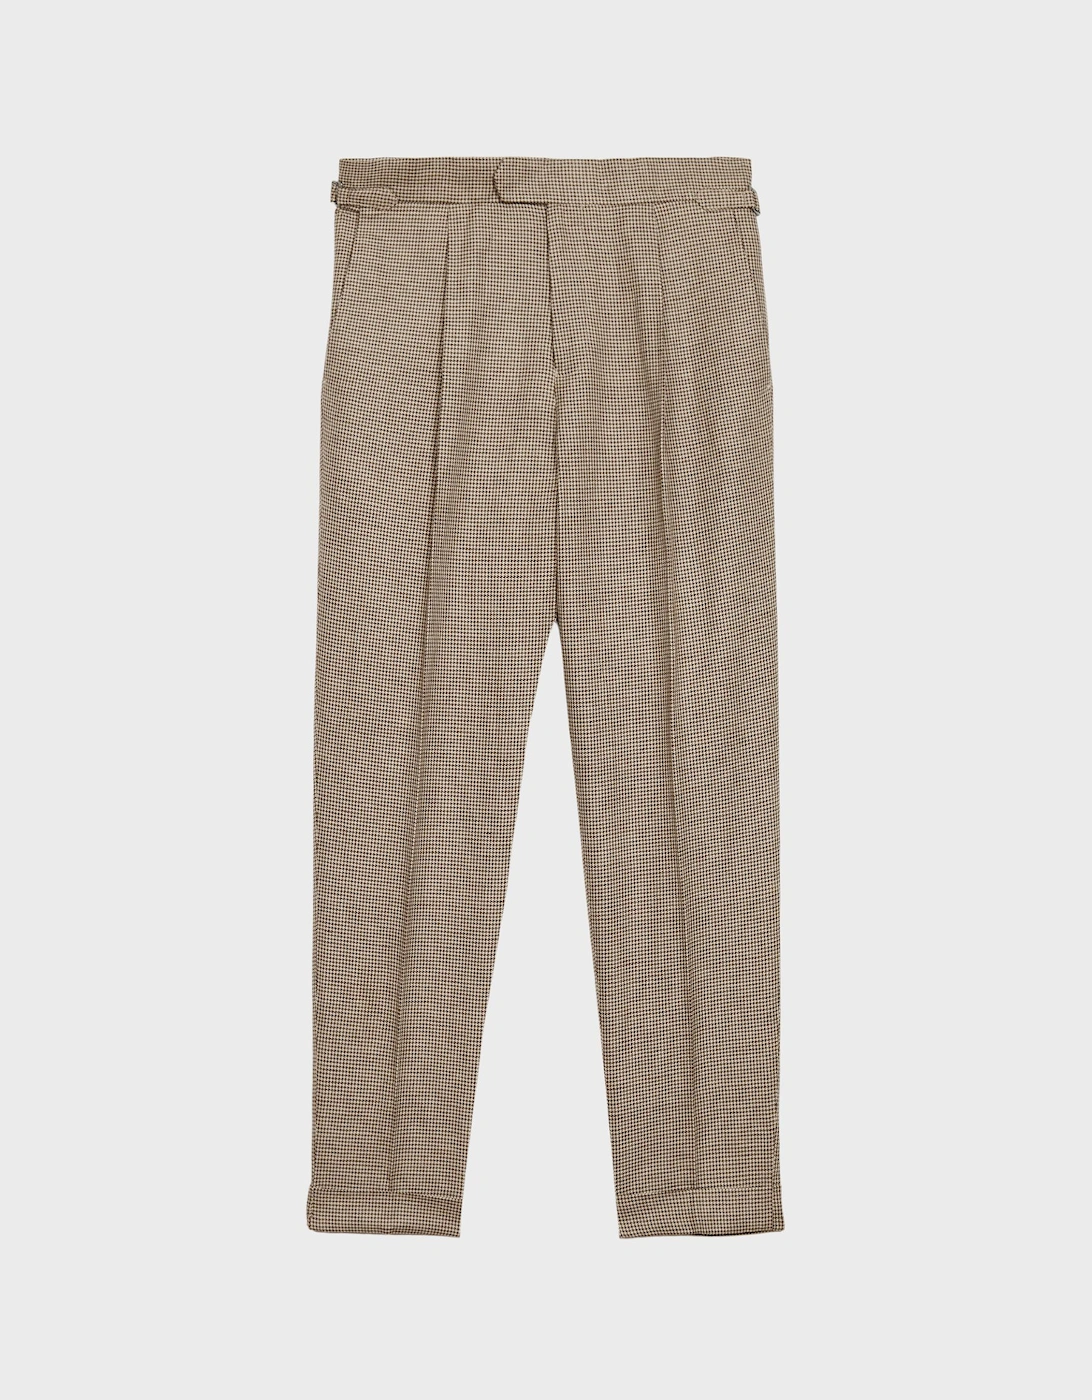 Formal Puppytooth Check Trousers, 2 of 1